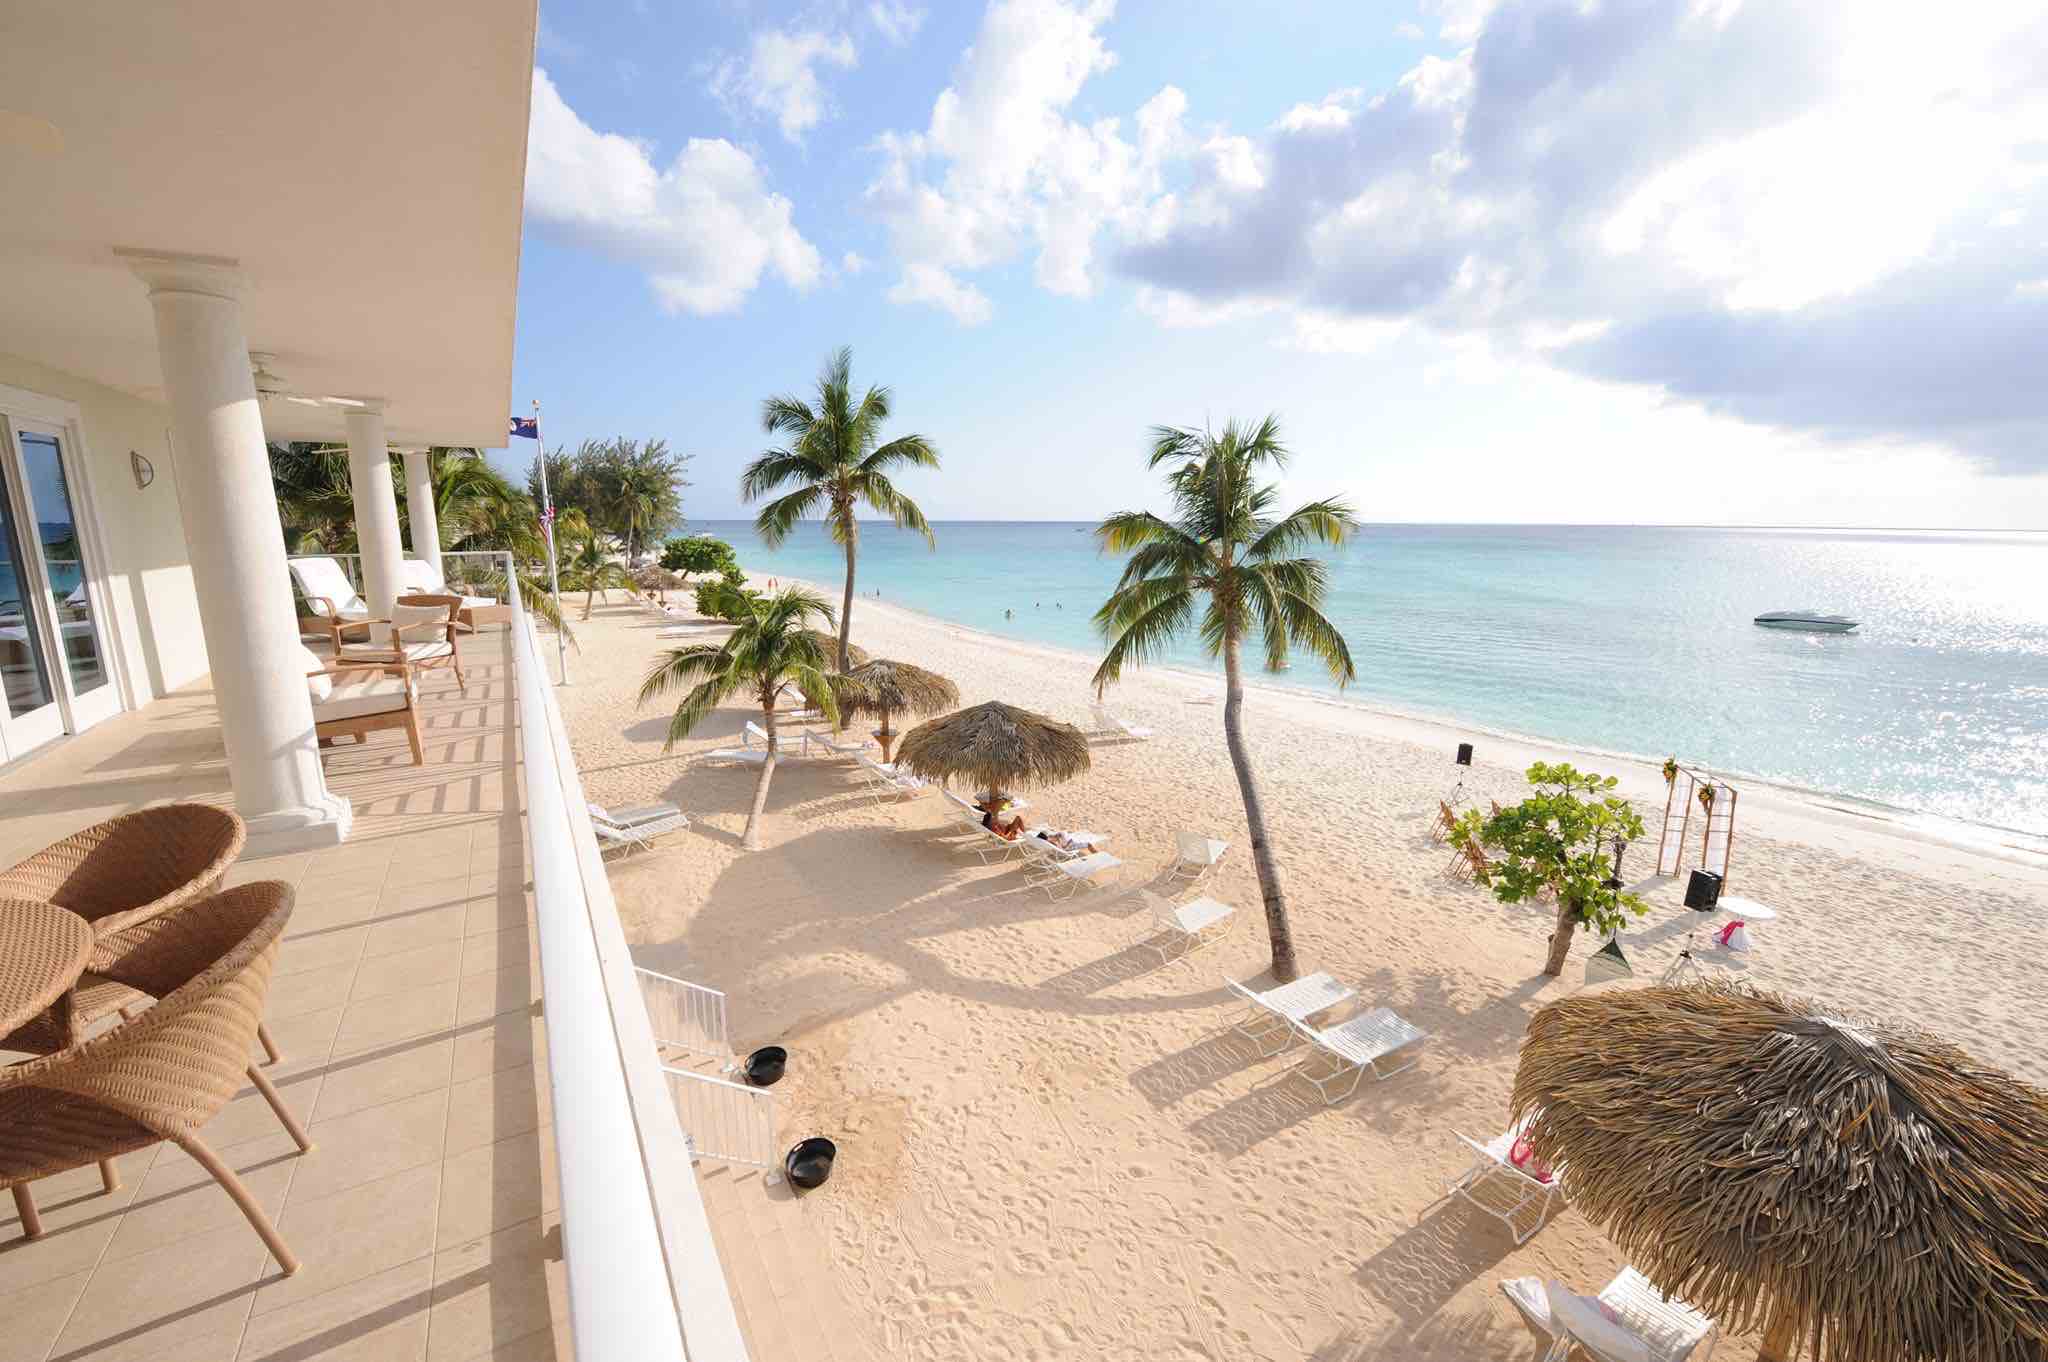 Caribbean Club balcony view over the beach luxury hotels in cayman islands 